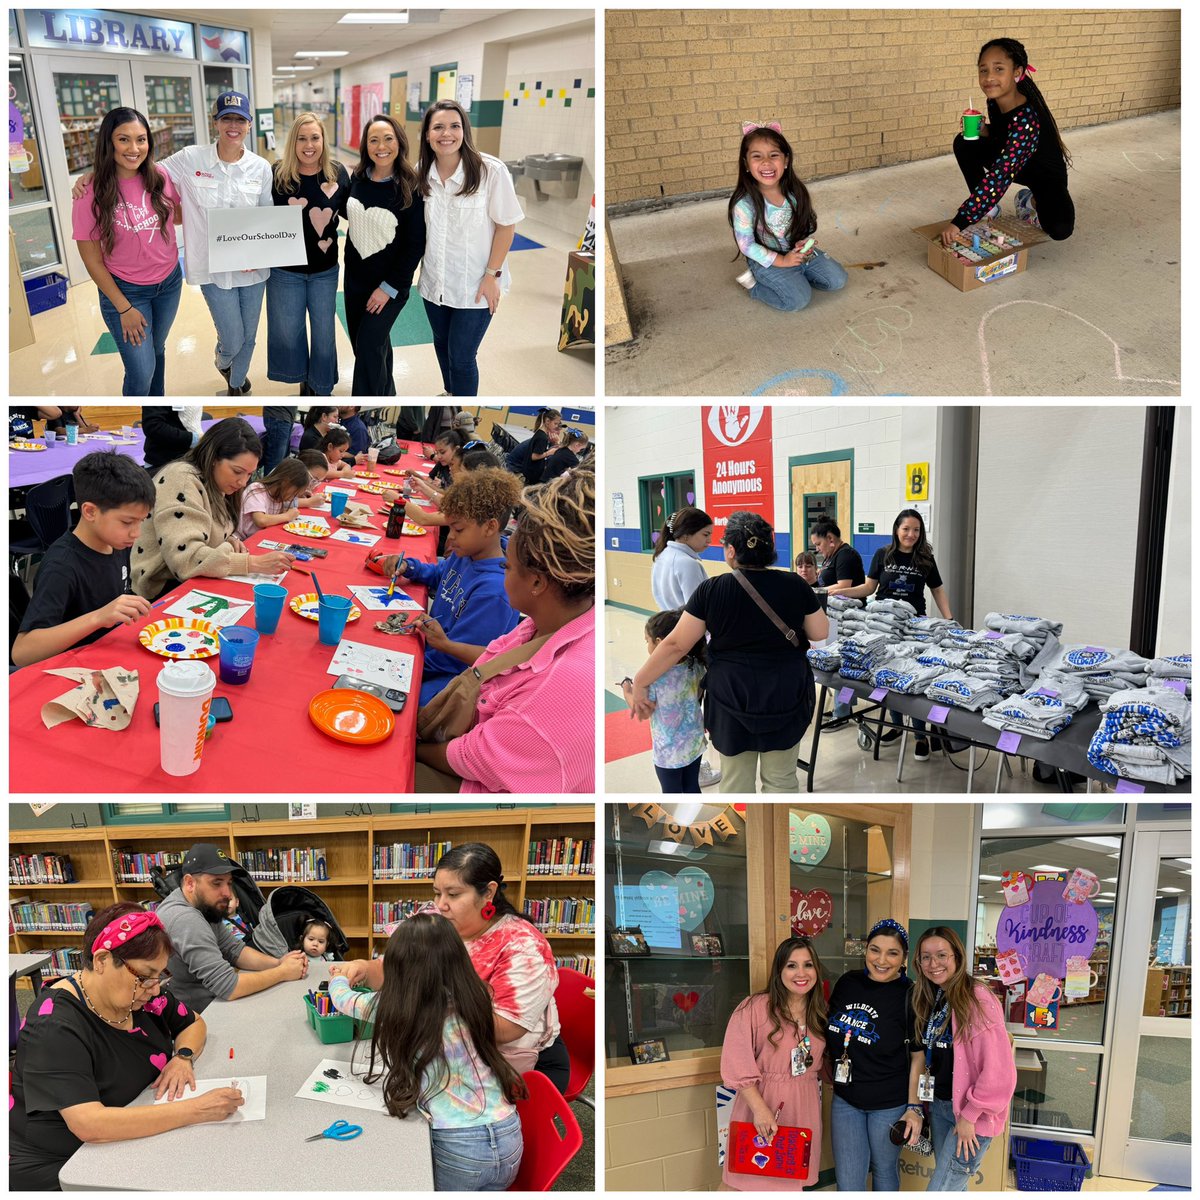 Our 3rd Annual Love Our School event was a huge hit! Wernli family & friends showed up community bonding, as we celebrated our school spirit together! Big thanks to @KarrsClassroom and School Connect for bringing all of us together 💙🐾@lorimshaw @mrsfeldt5 #RootEdWernli